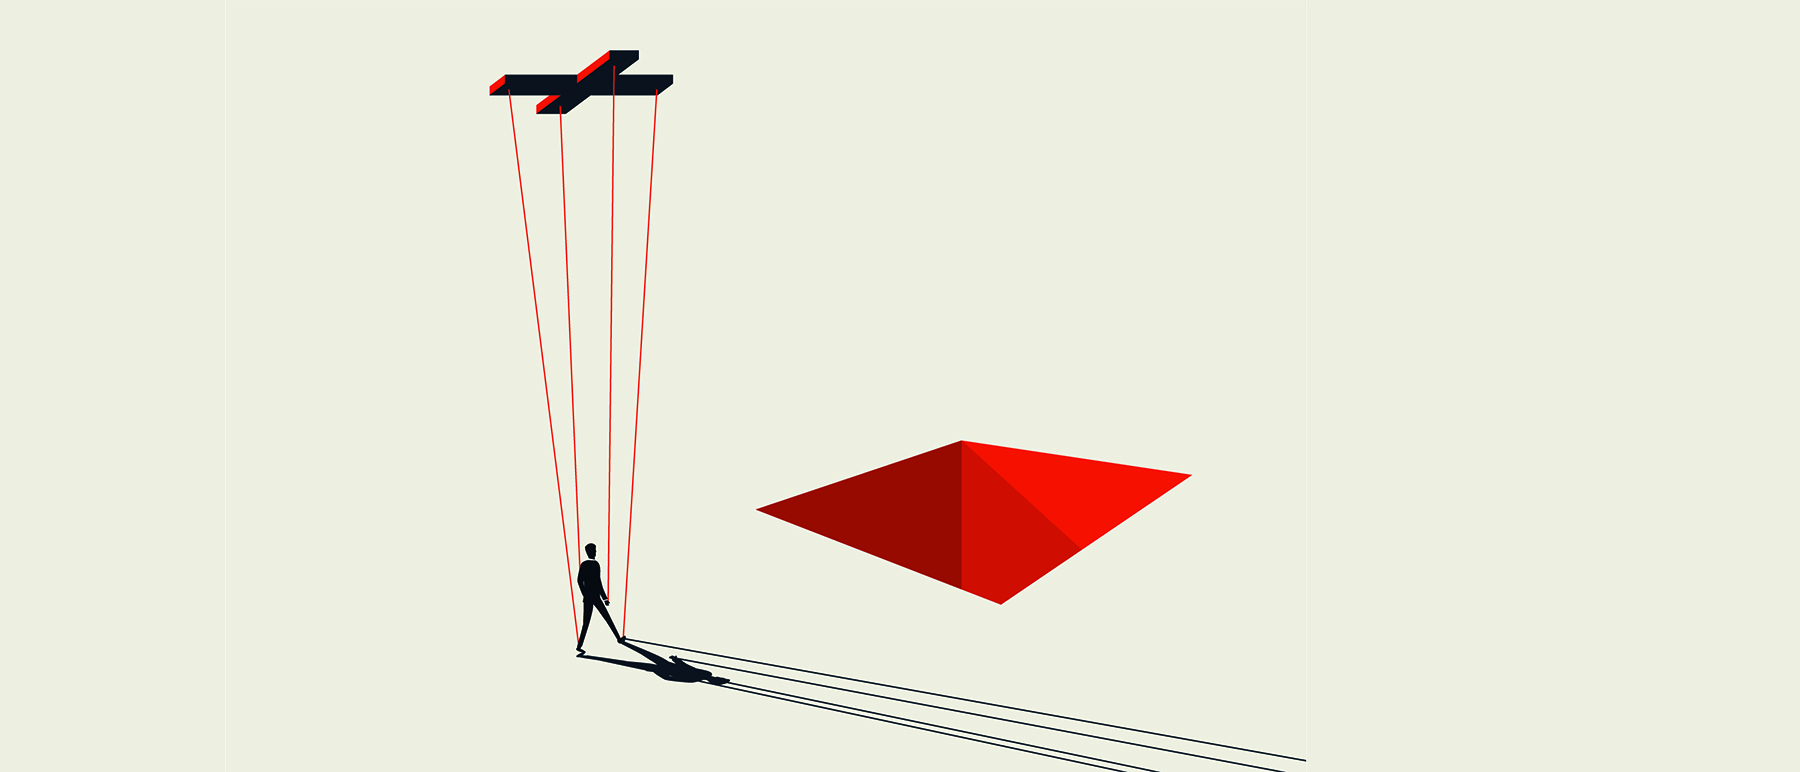 A vector image of the same marionette being led by strings towards a hole in the ground